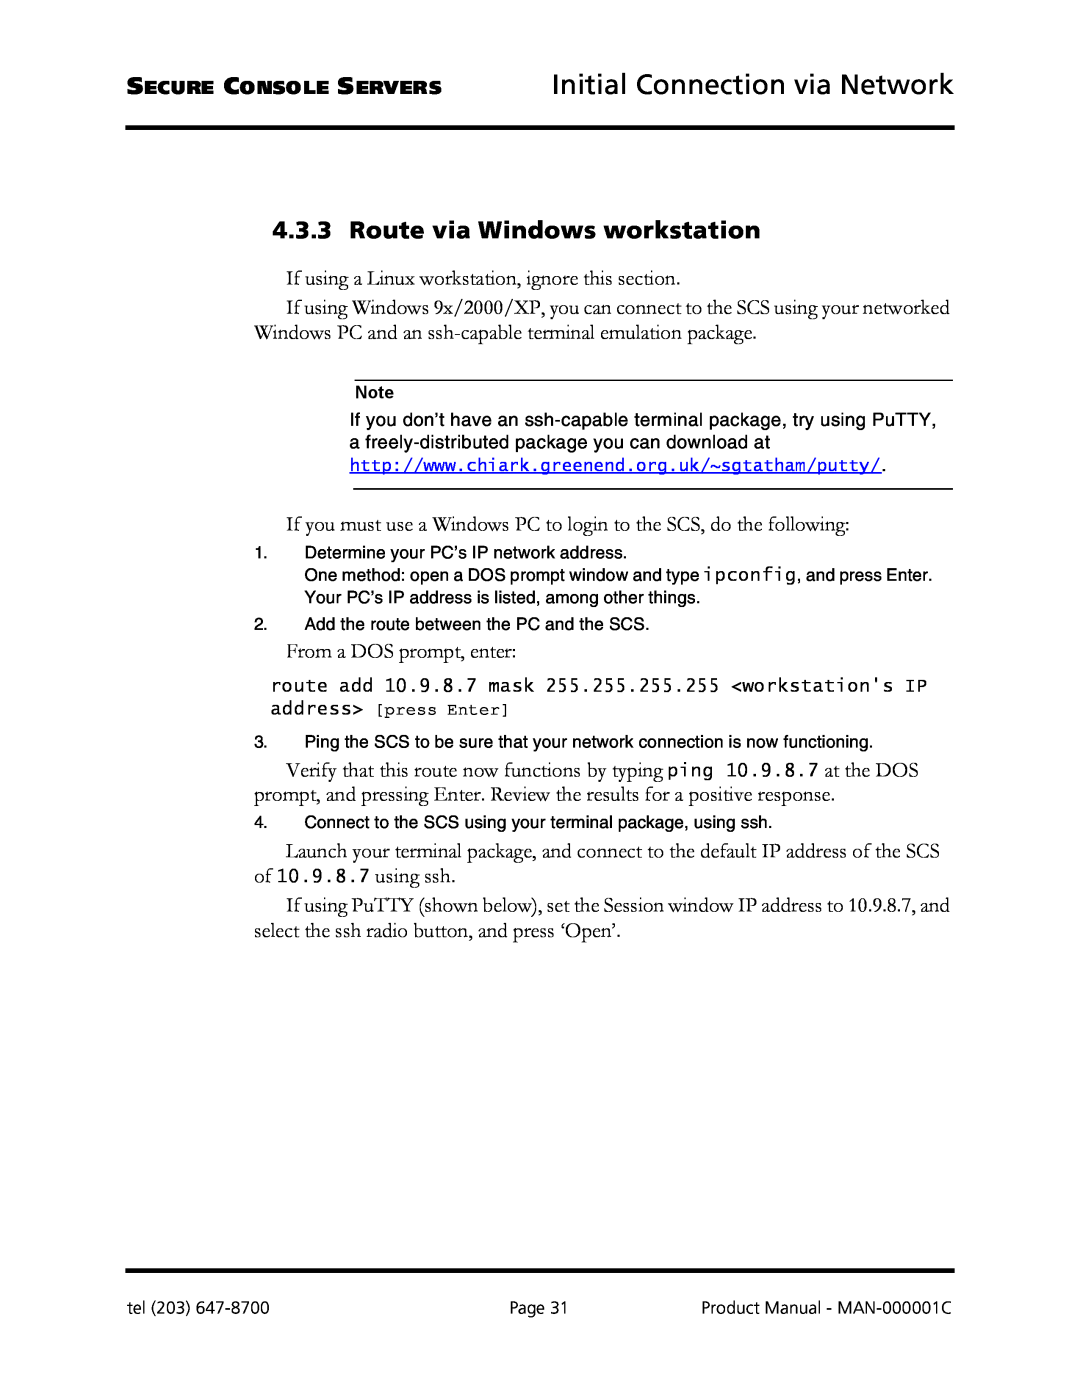 Logical Solutions SCS-R manual Initial Connection via Network, Route via Windows workstation 